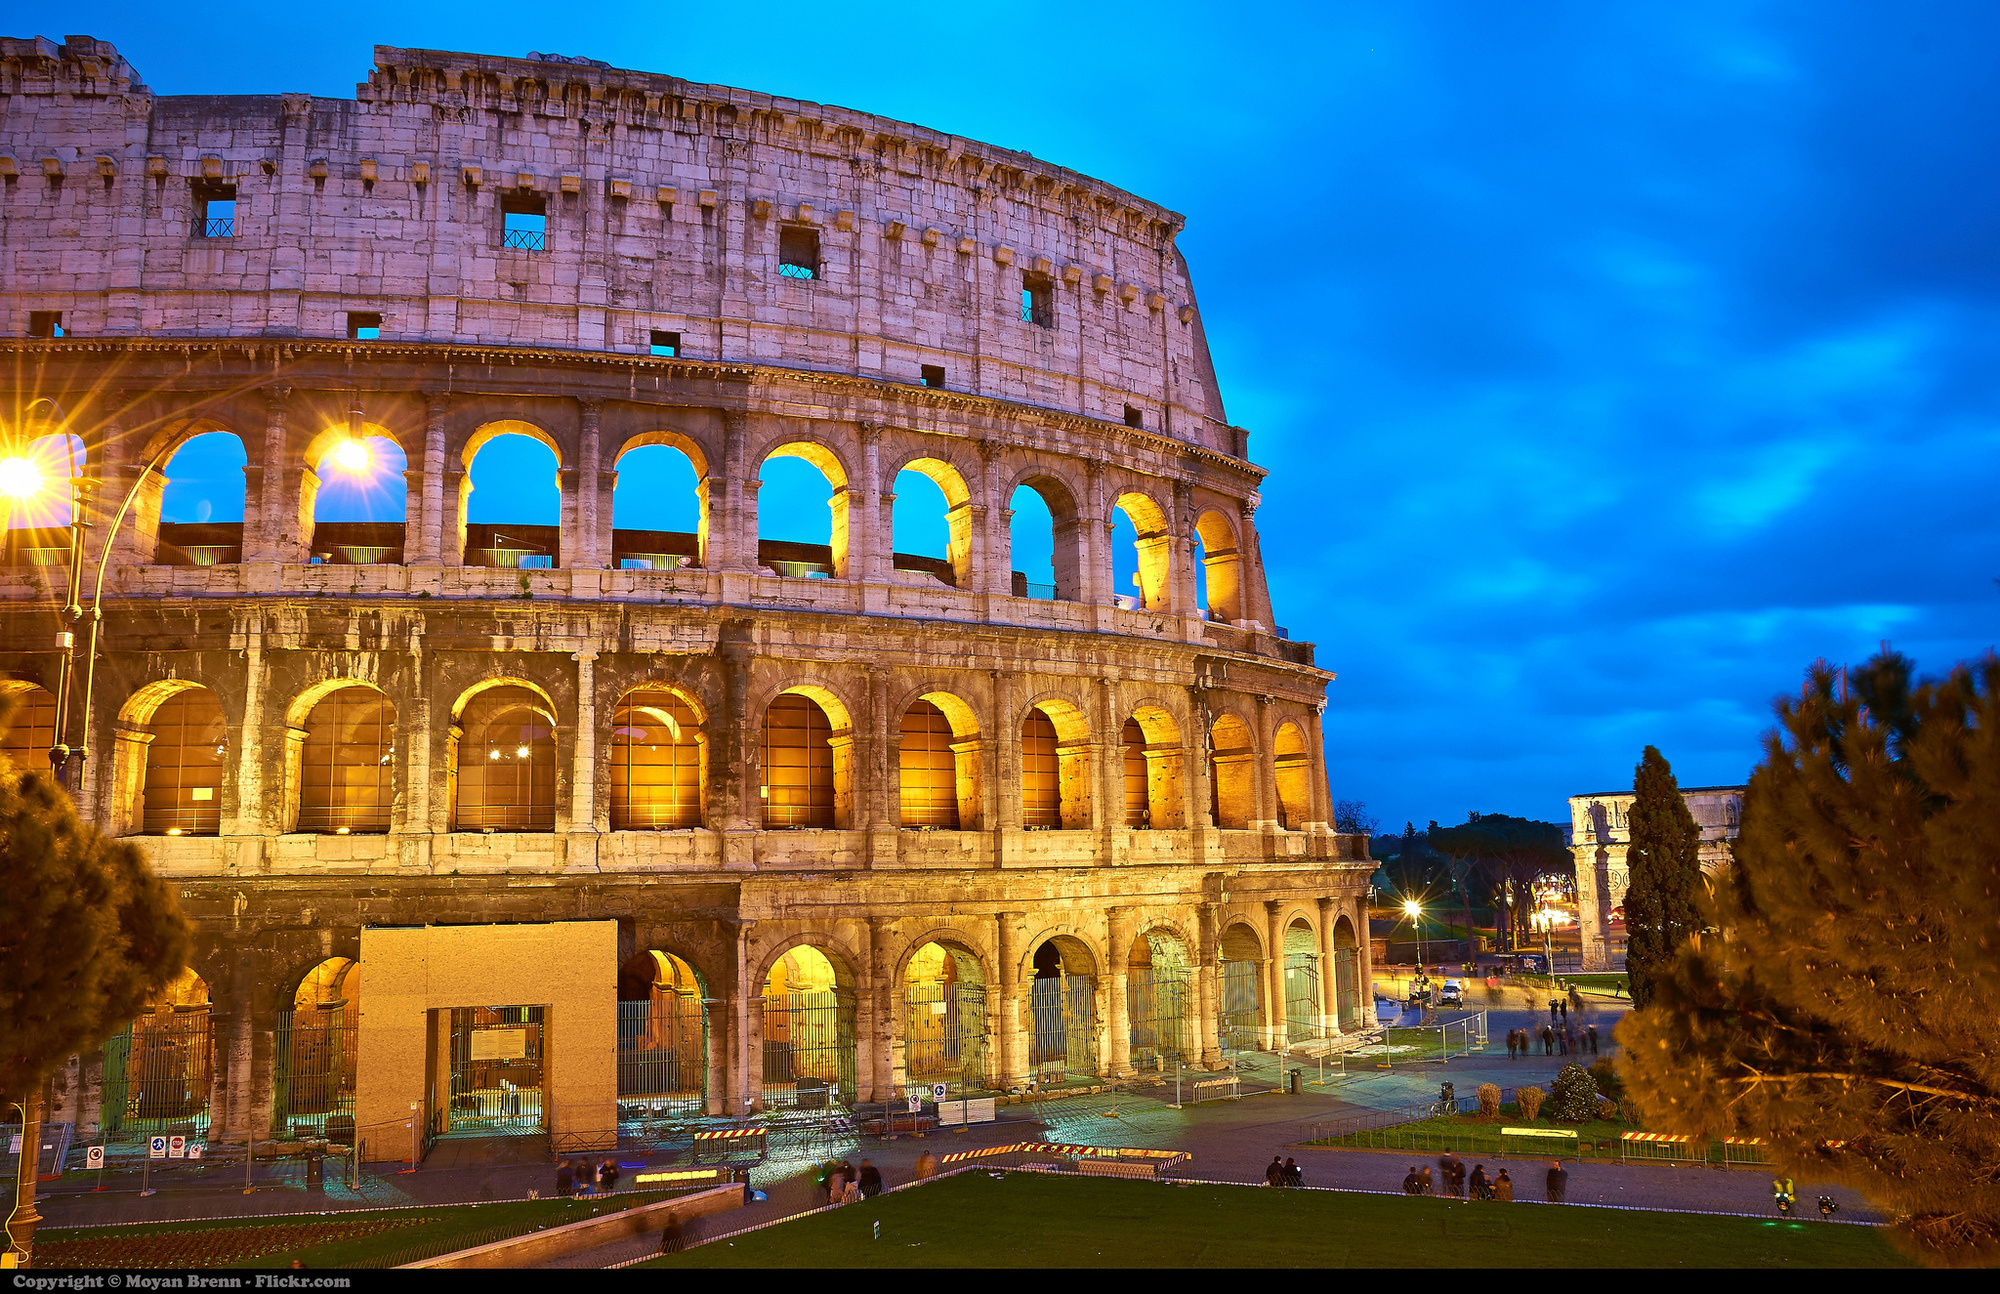 There is a city called Rome on every continent.